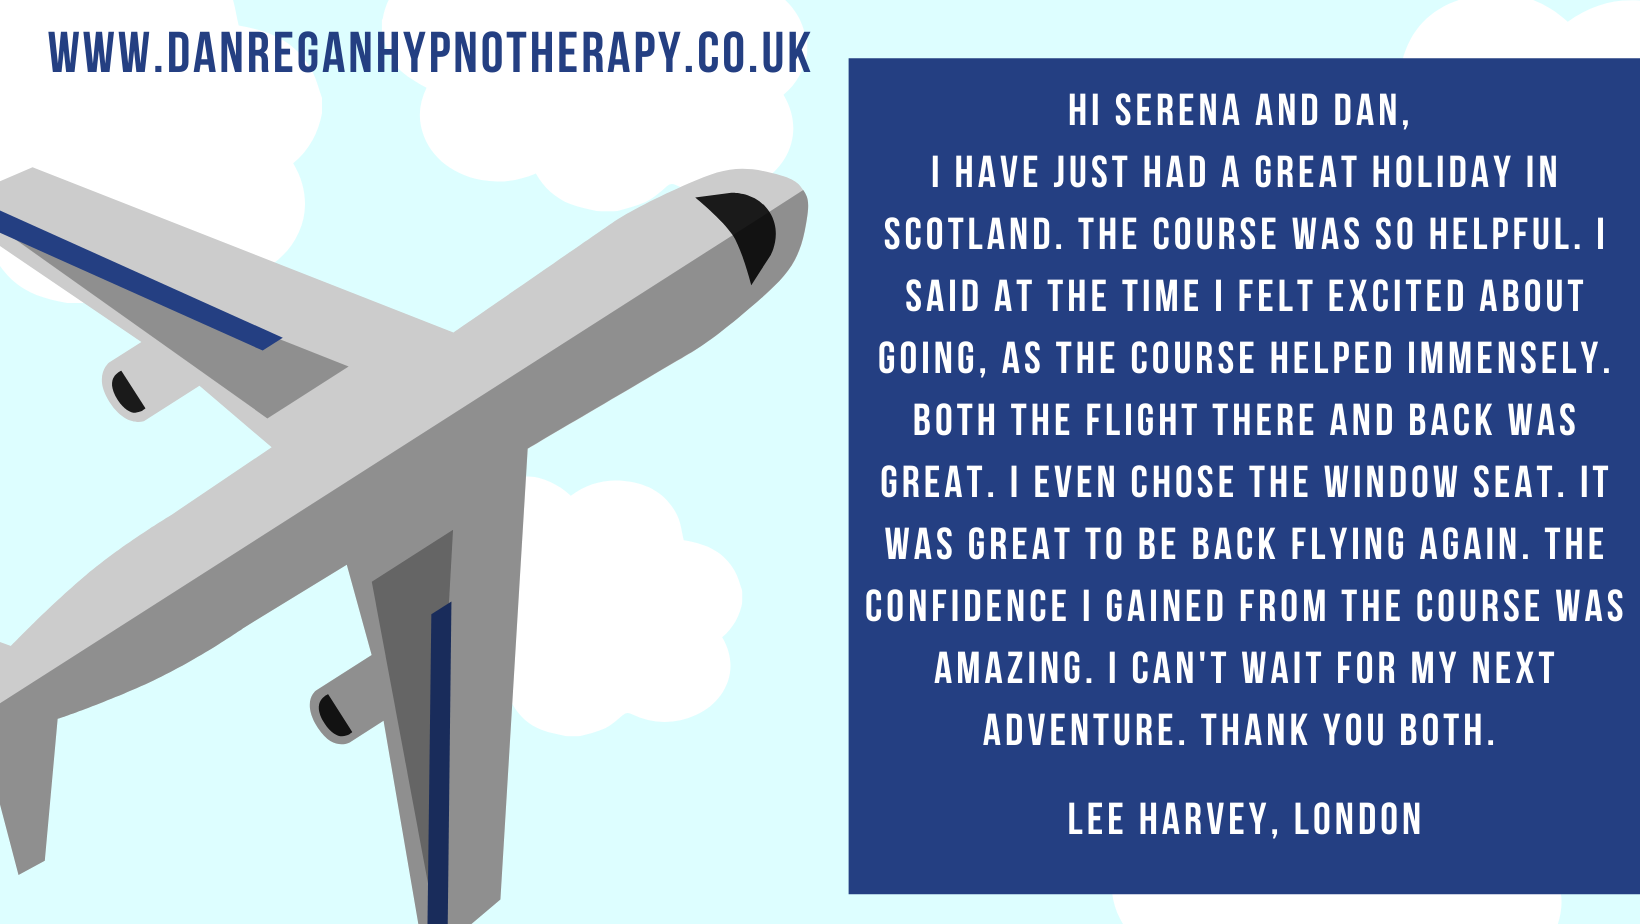 fear of flying hypnotherapy review - Dan Regan Hypnotherapy in Ely